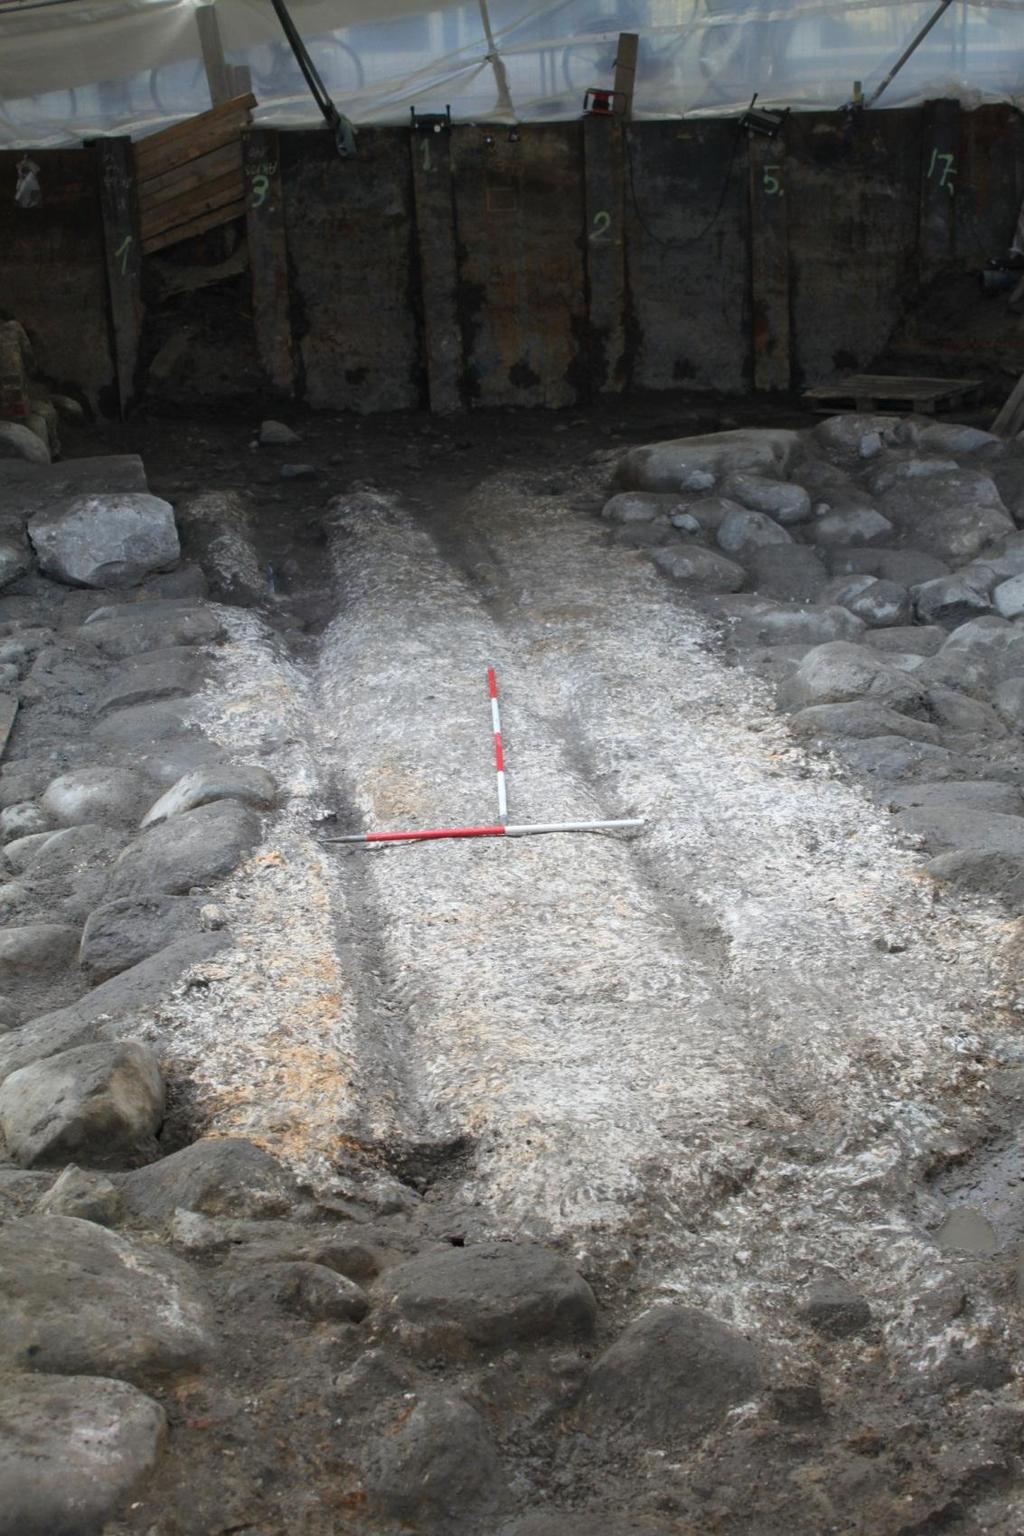 depth indicates heavy loads and wear which had necessitated the subsequent maintenance work filling the depressions with smaller stones and pebbles. The cart wheel spacing varied from 0.9-1.